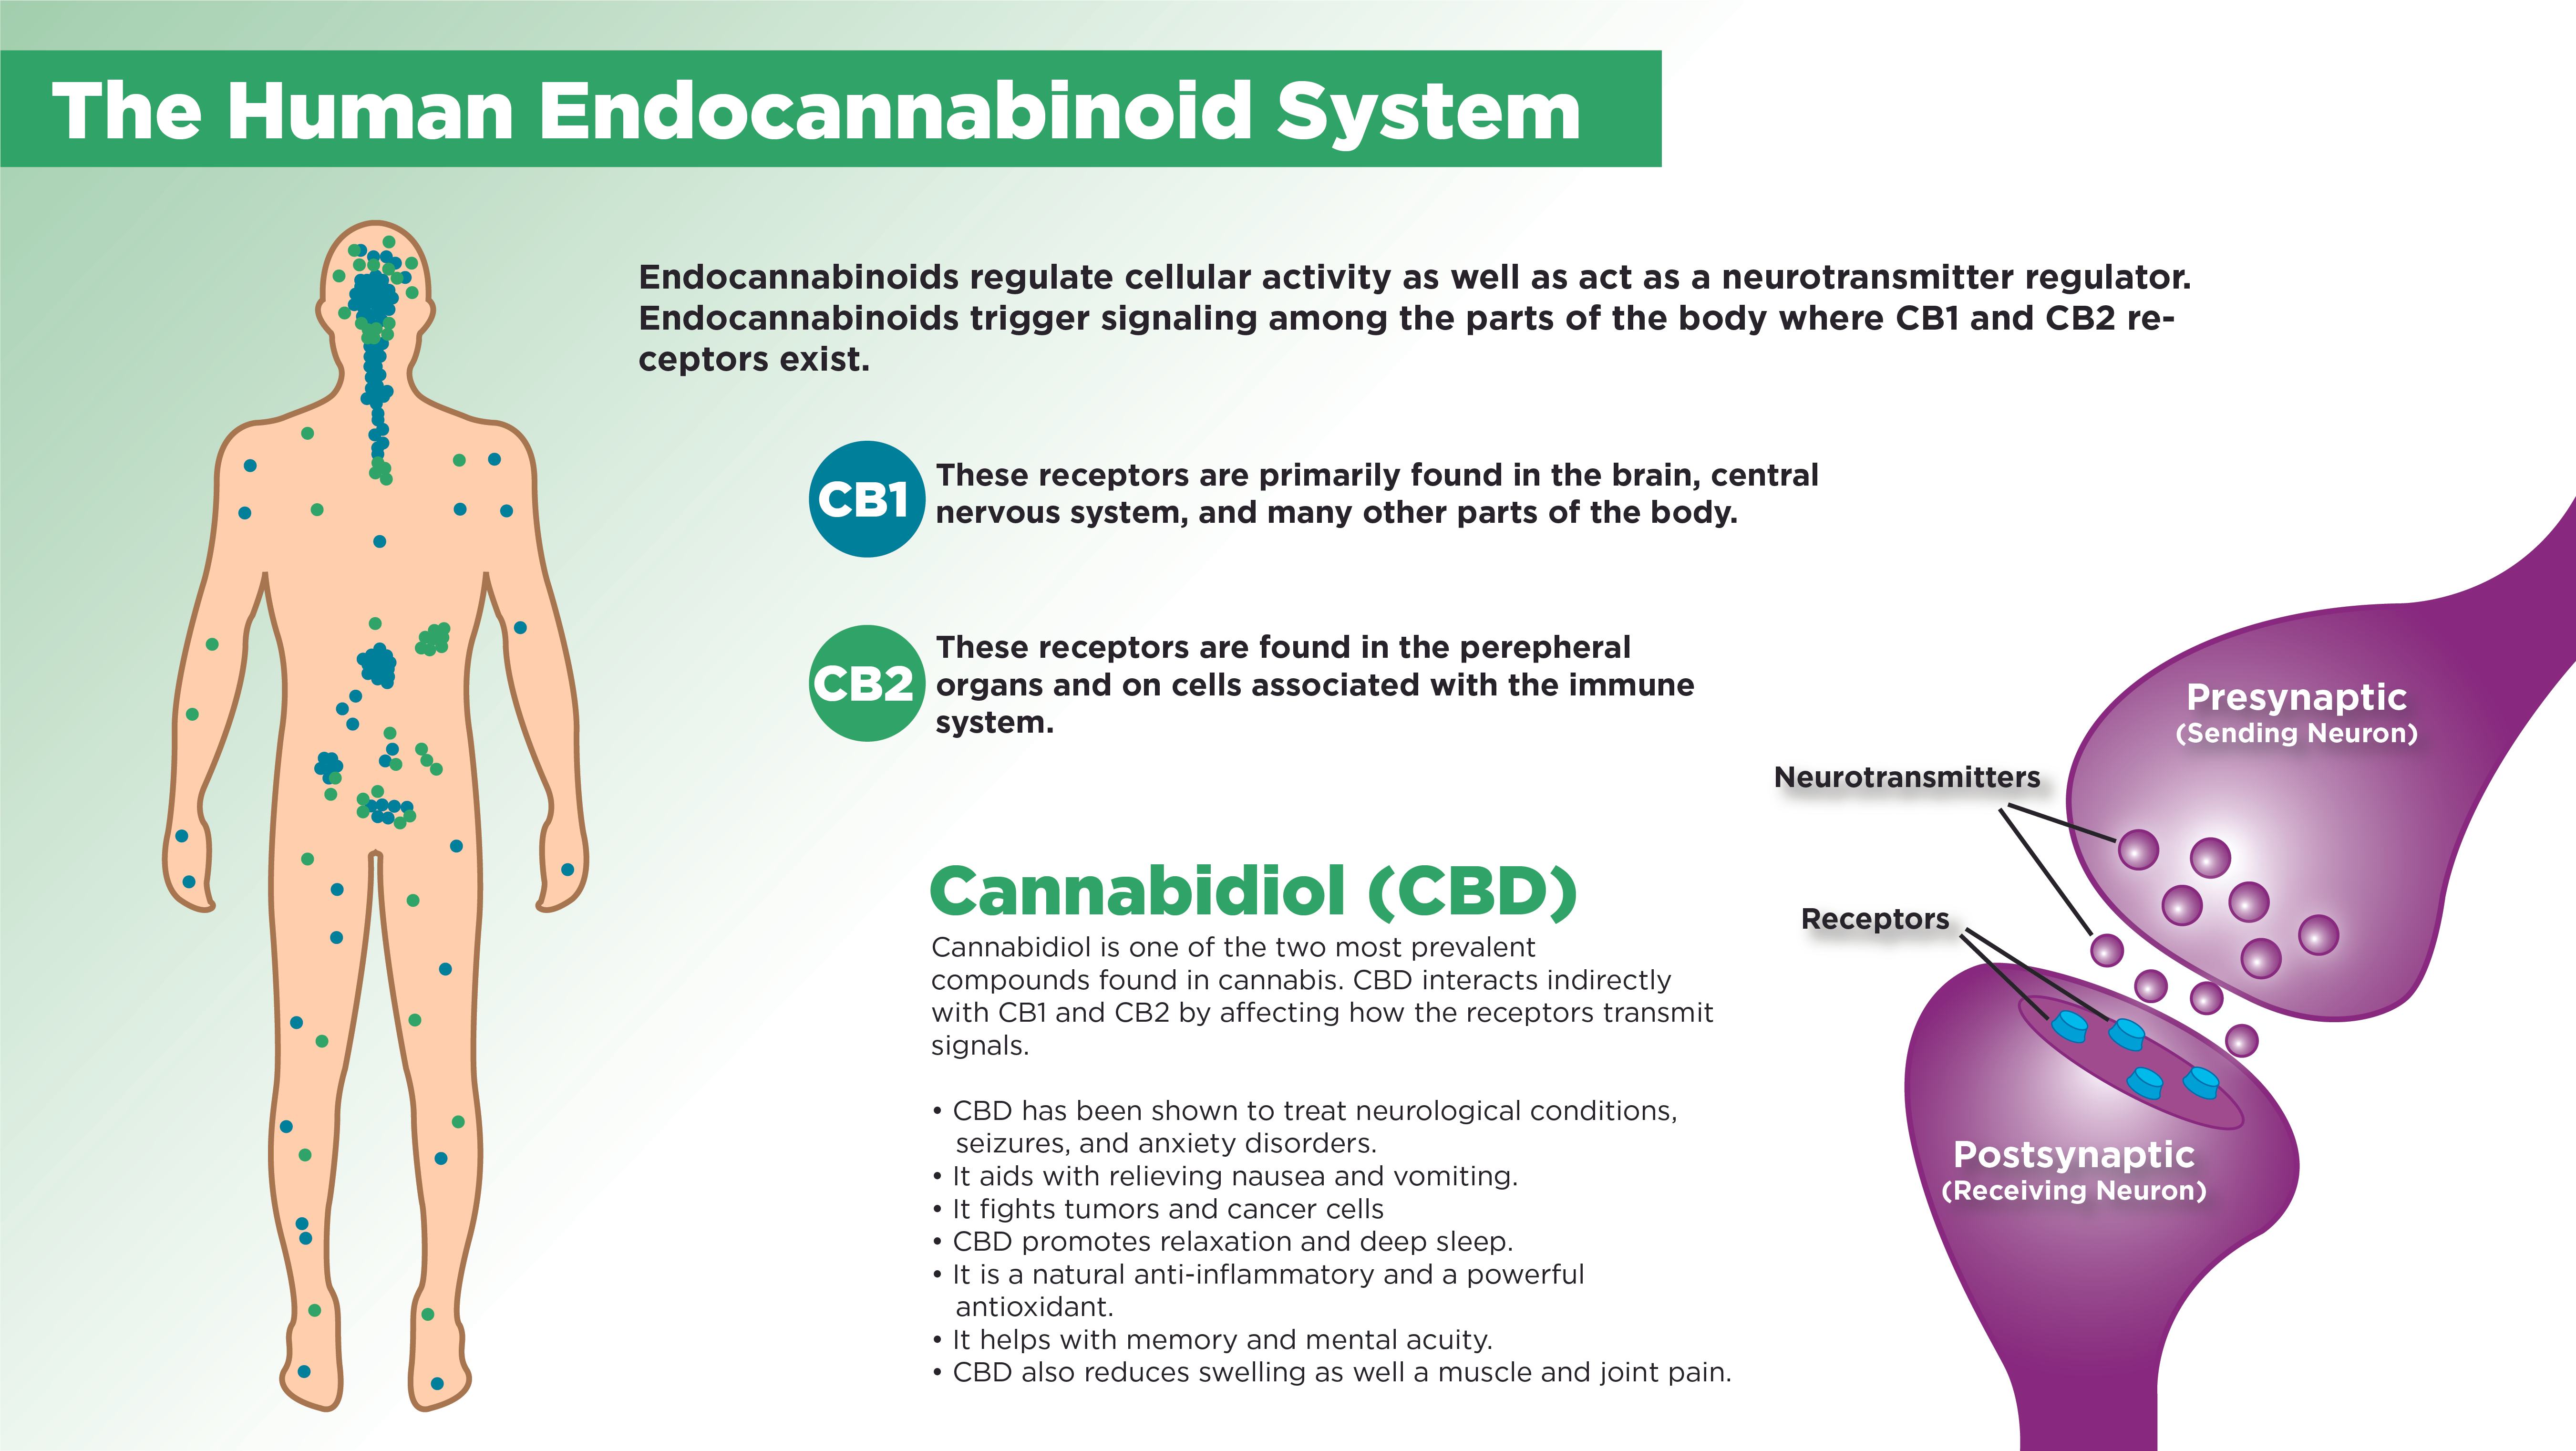 Colorful diagram of the human endocannabinoid system with definitions of CBD, CB1 and CB2 receptors and synaptic neurons.